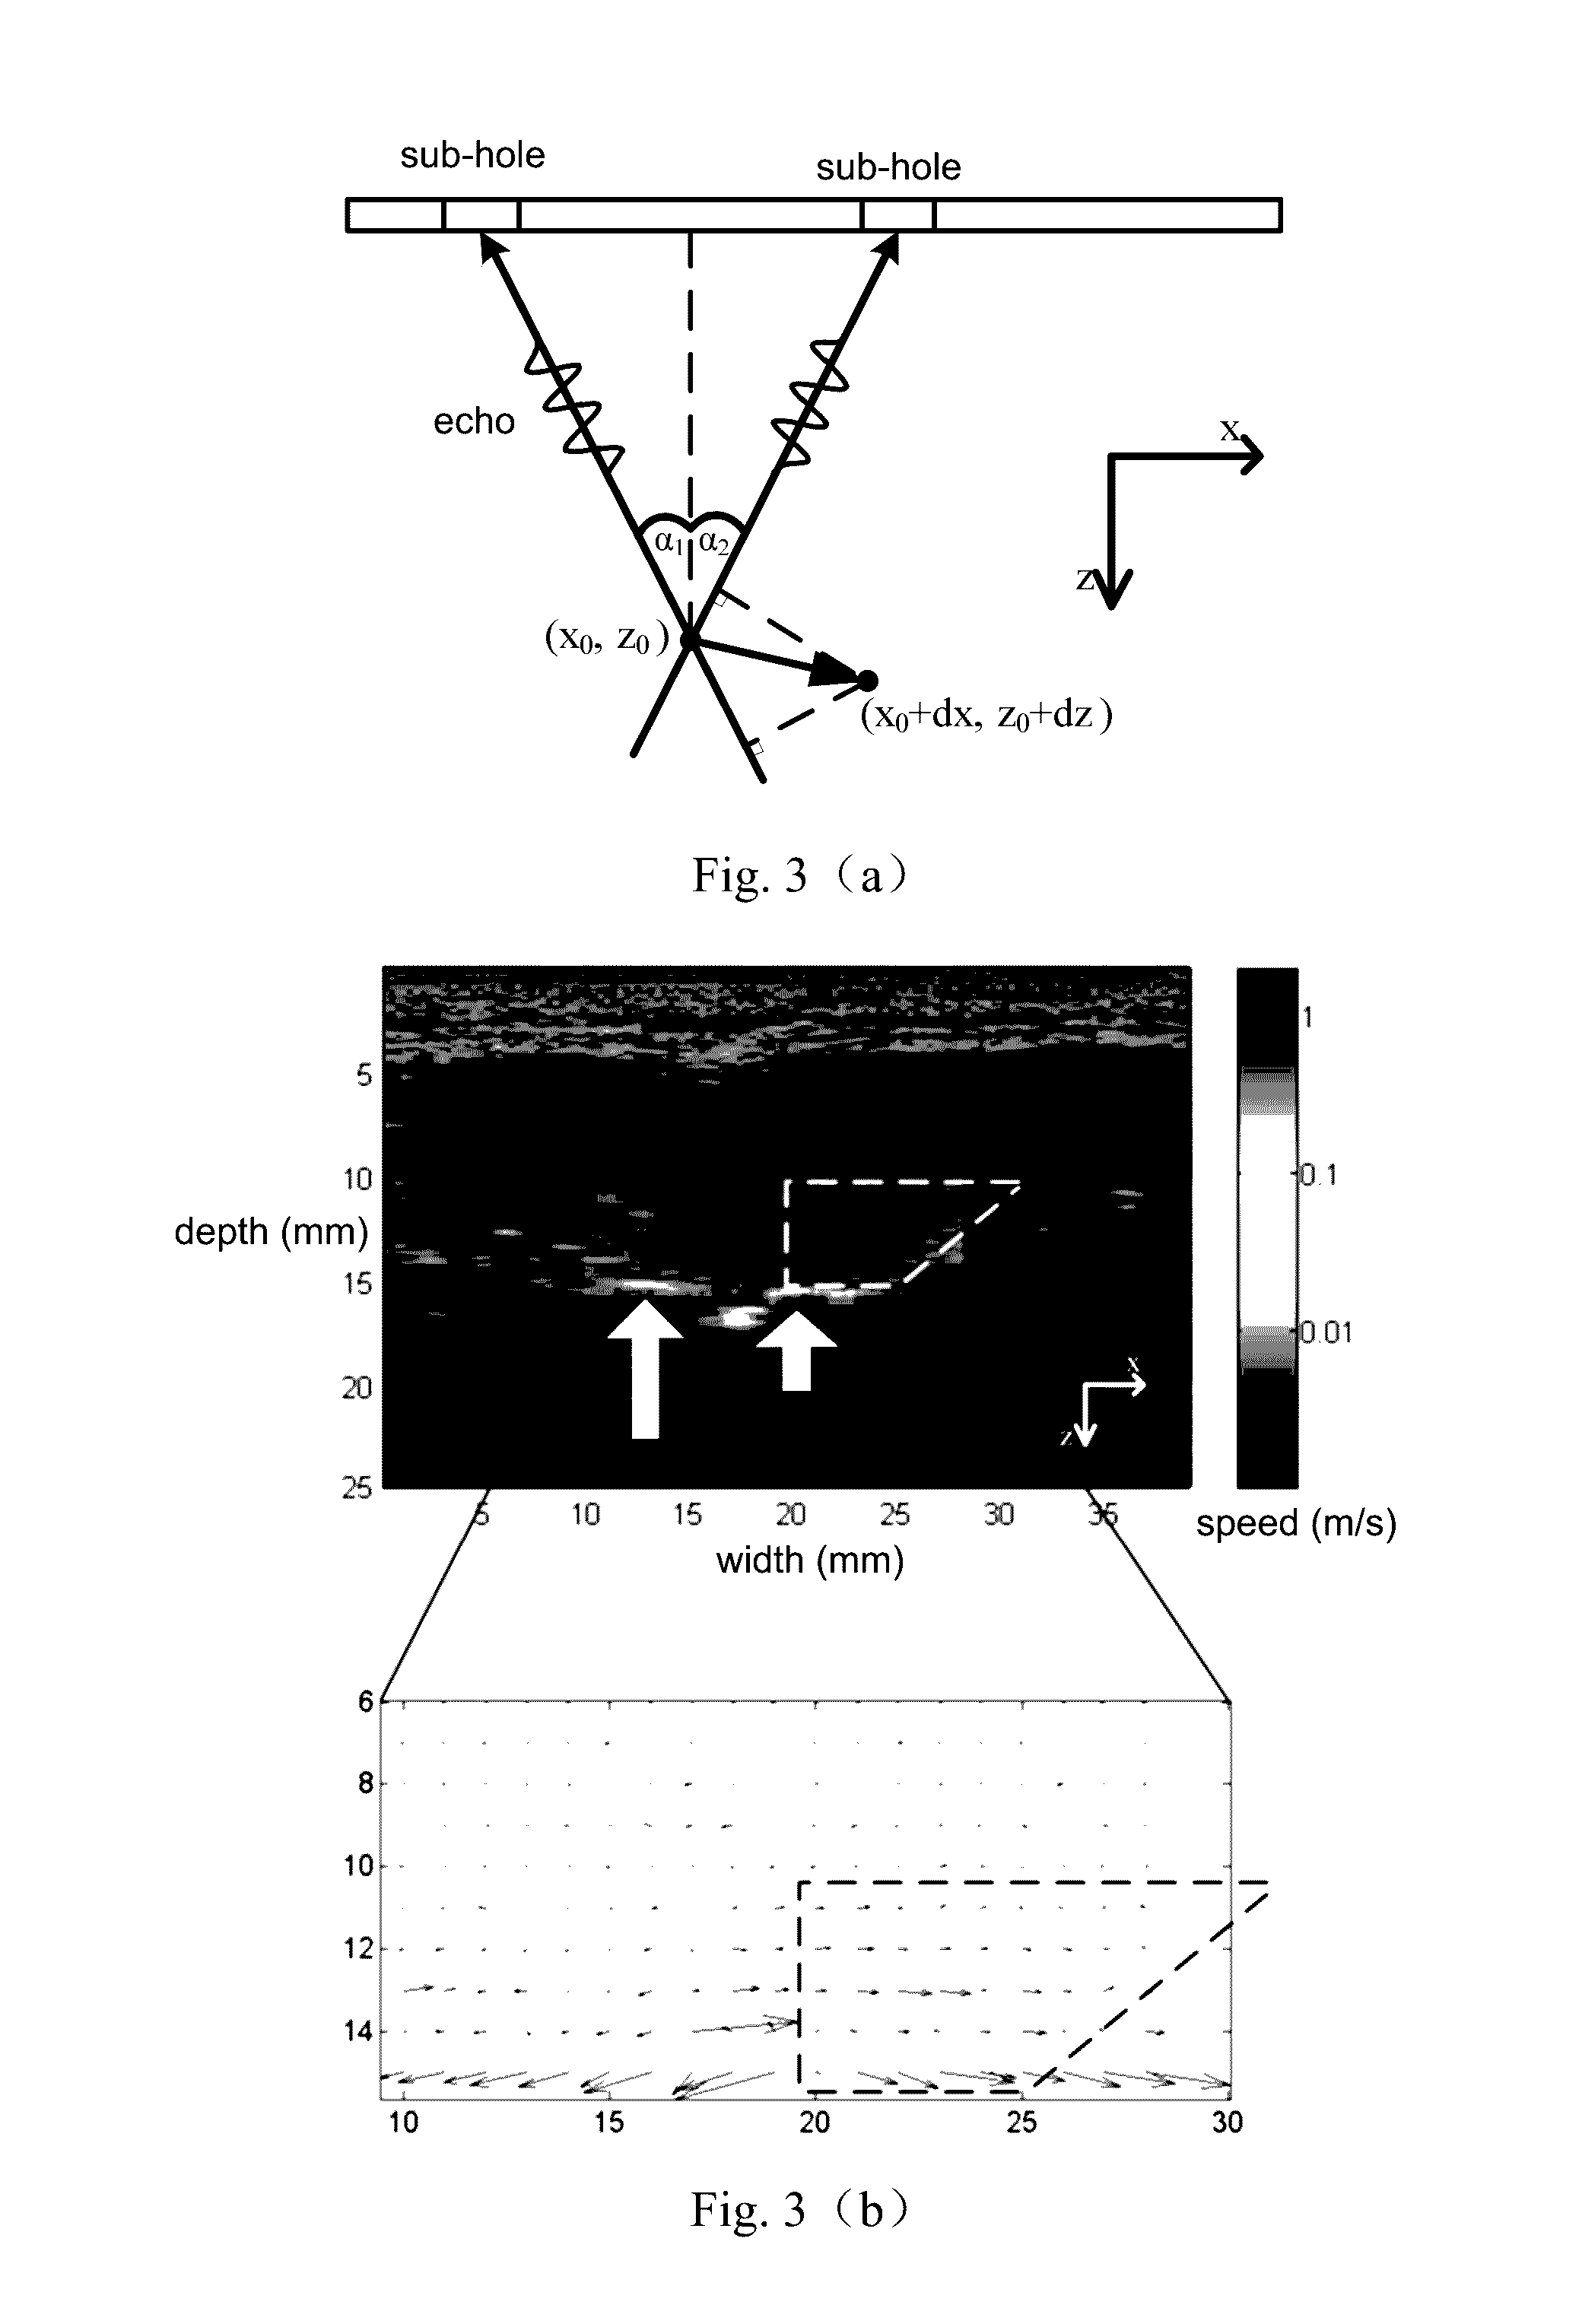 Imaging and measuring system of vocal cord vibration based on plane wave ultrasonography, and method thereof